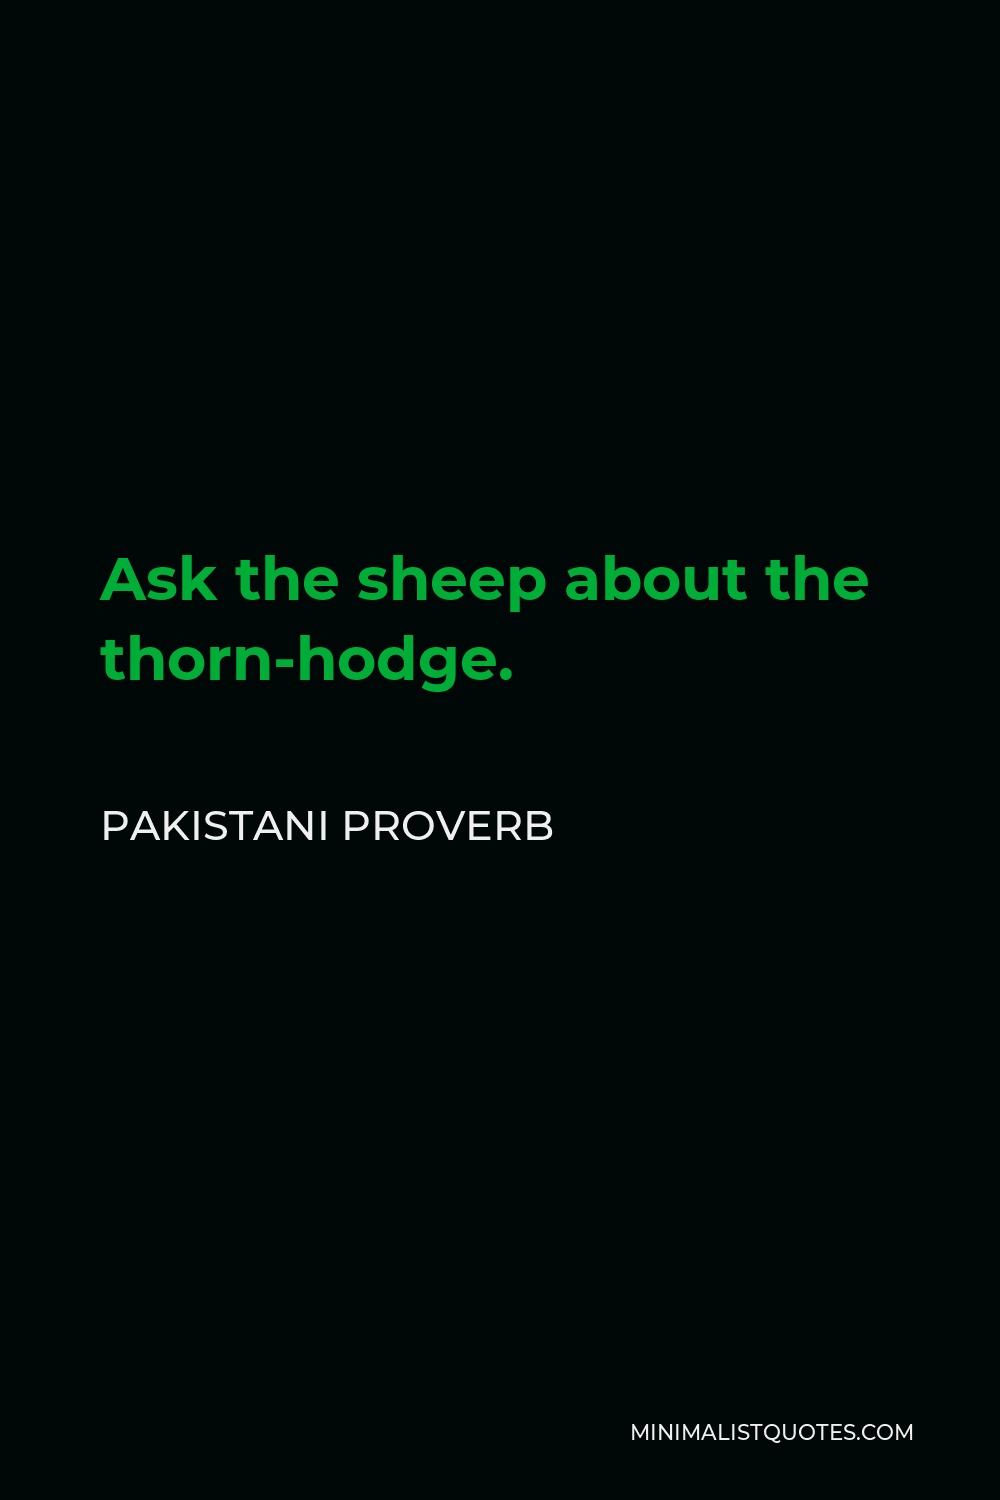 Pakistani Proverb Quote - Ask the sheep about the thorn-hodge.